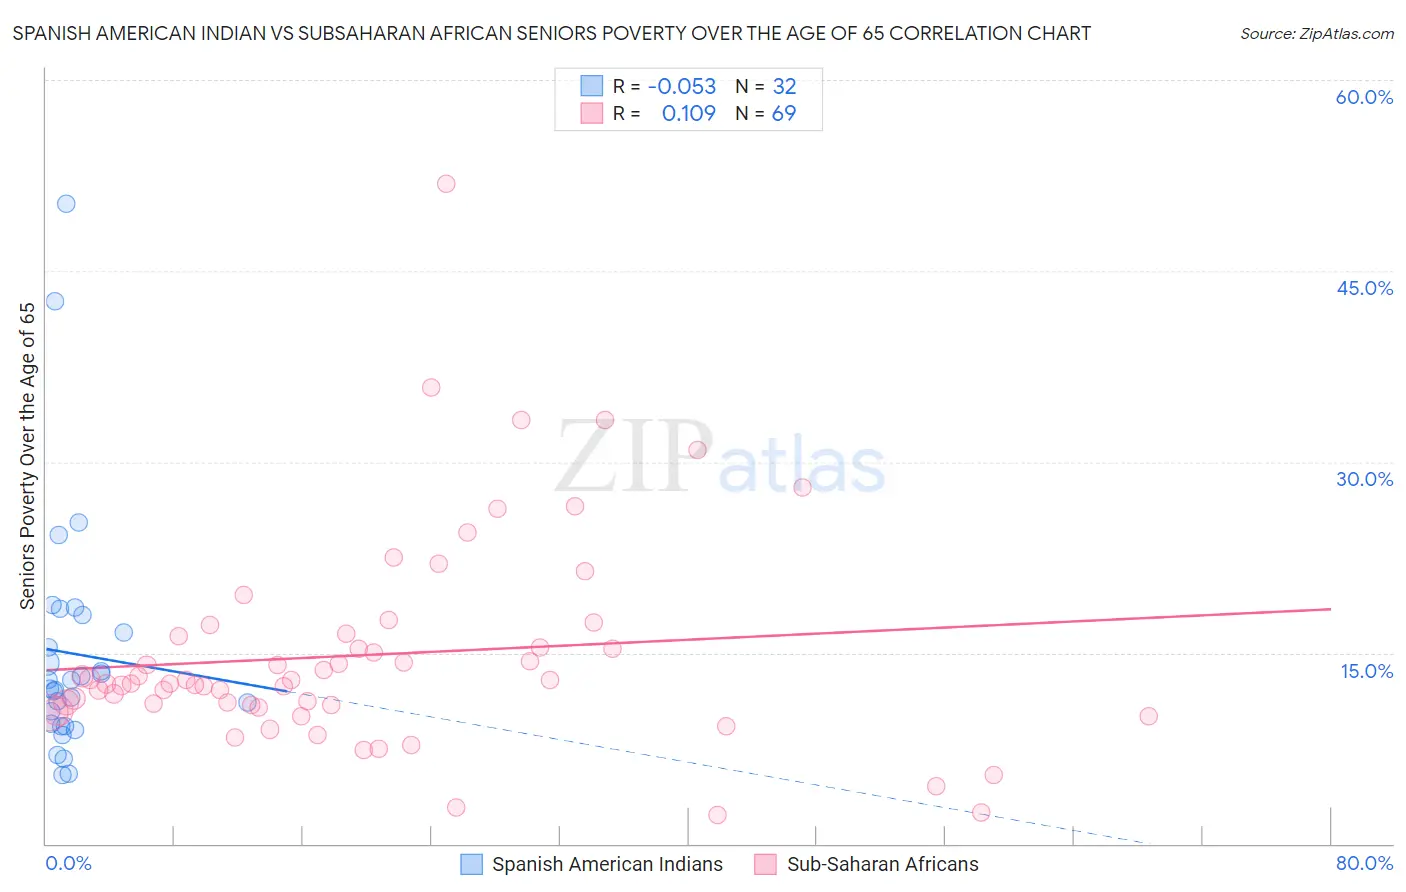 Spanish American Indian vs Subsaharan African Seniors Poverty Over the Age of 65